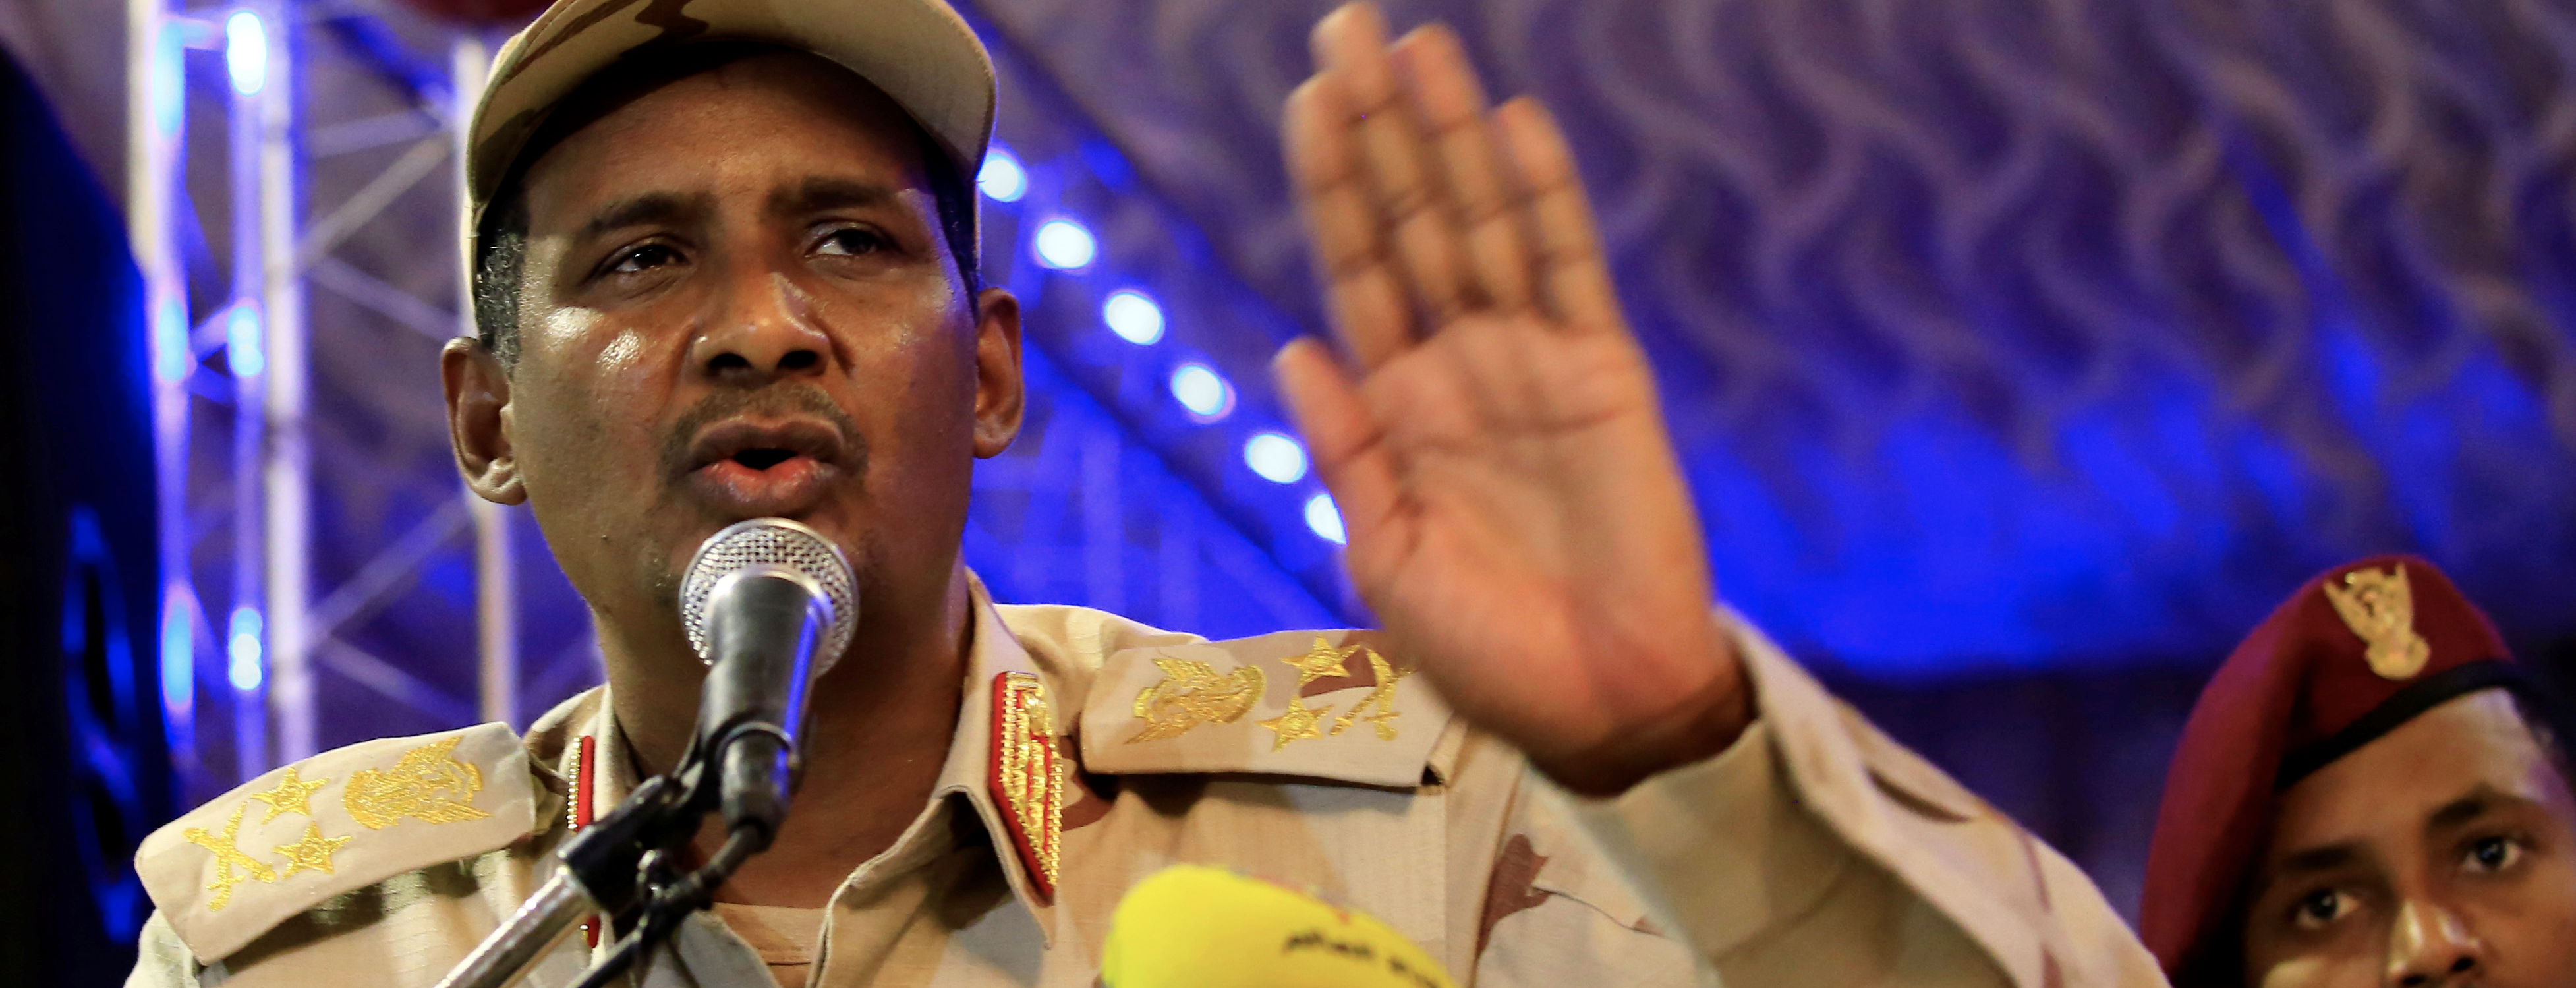 Sudanese Facebook network promoting paramilitary group removed month before coup